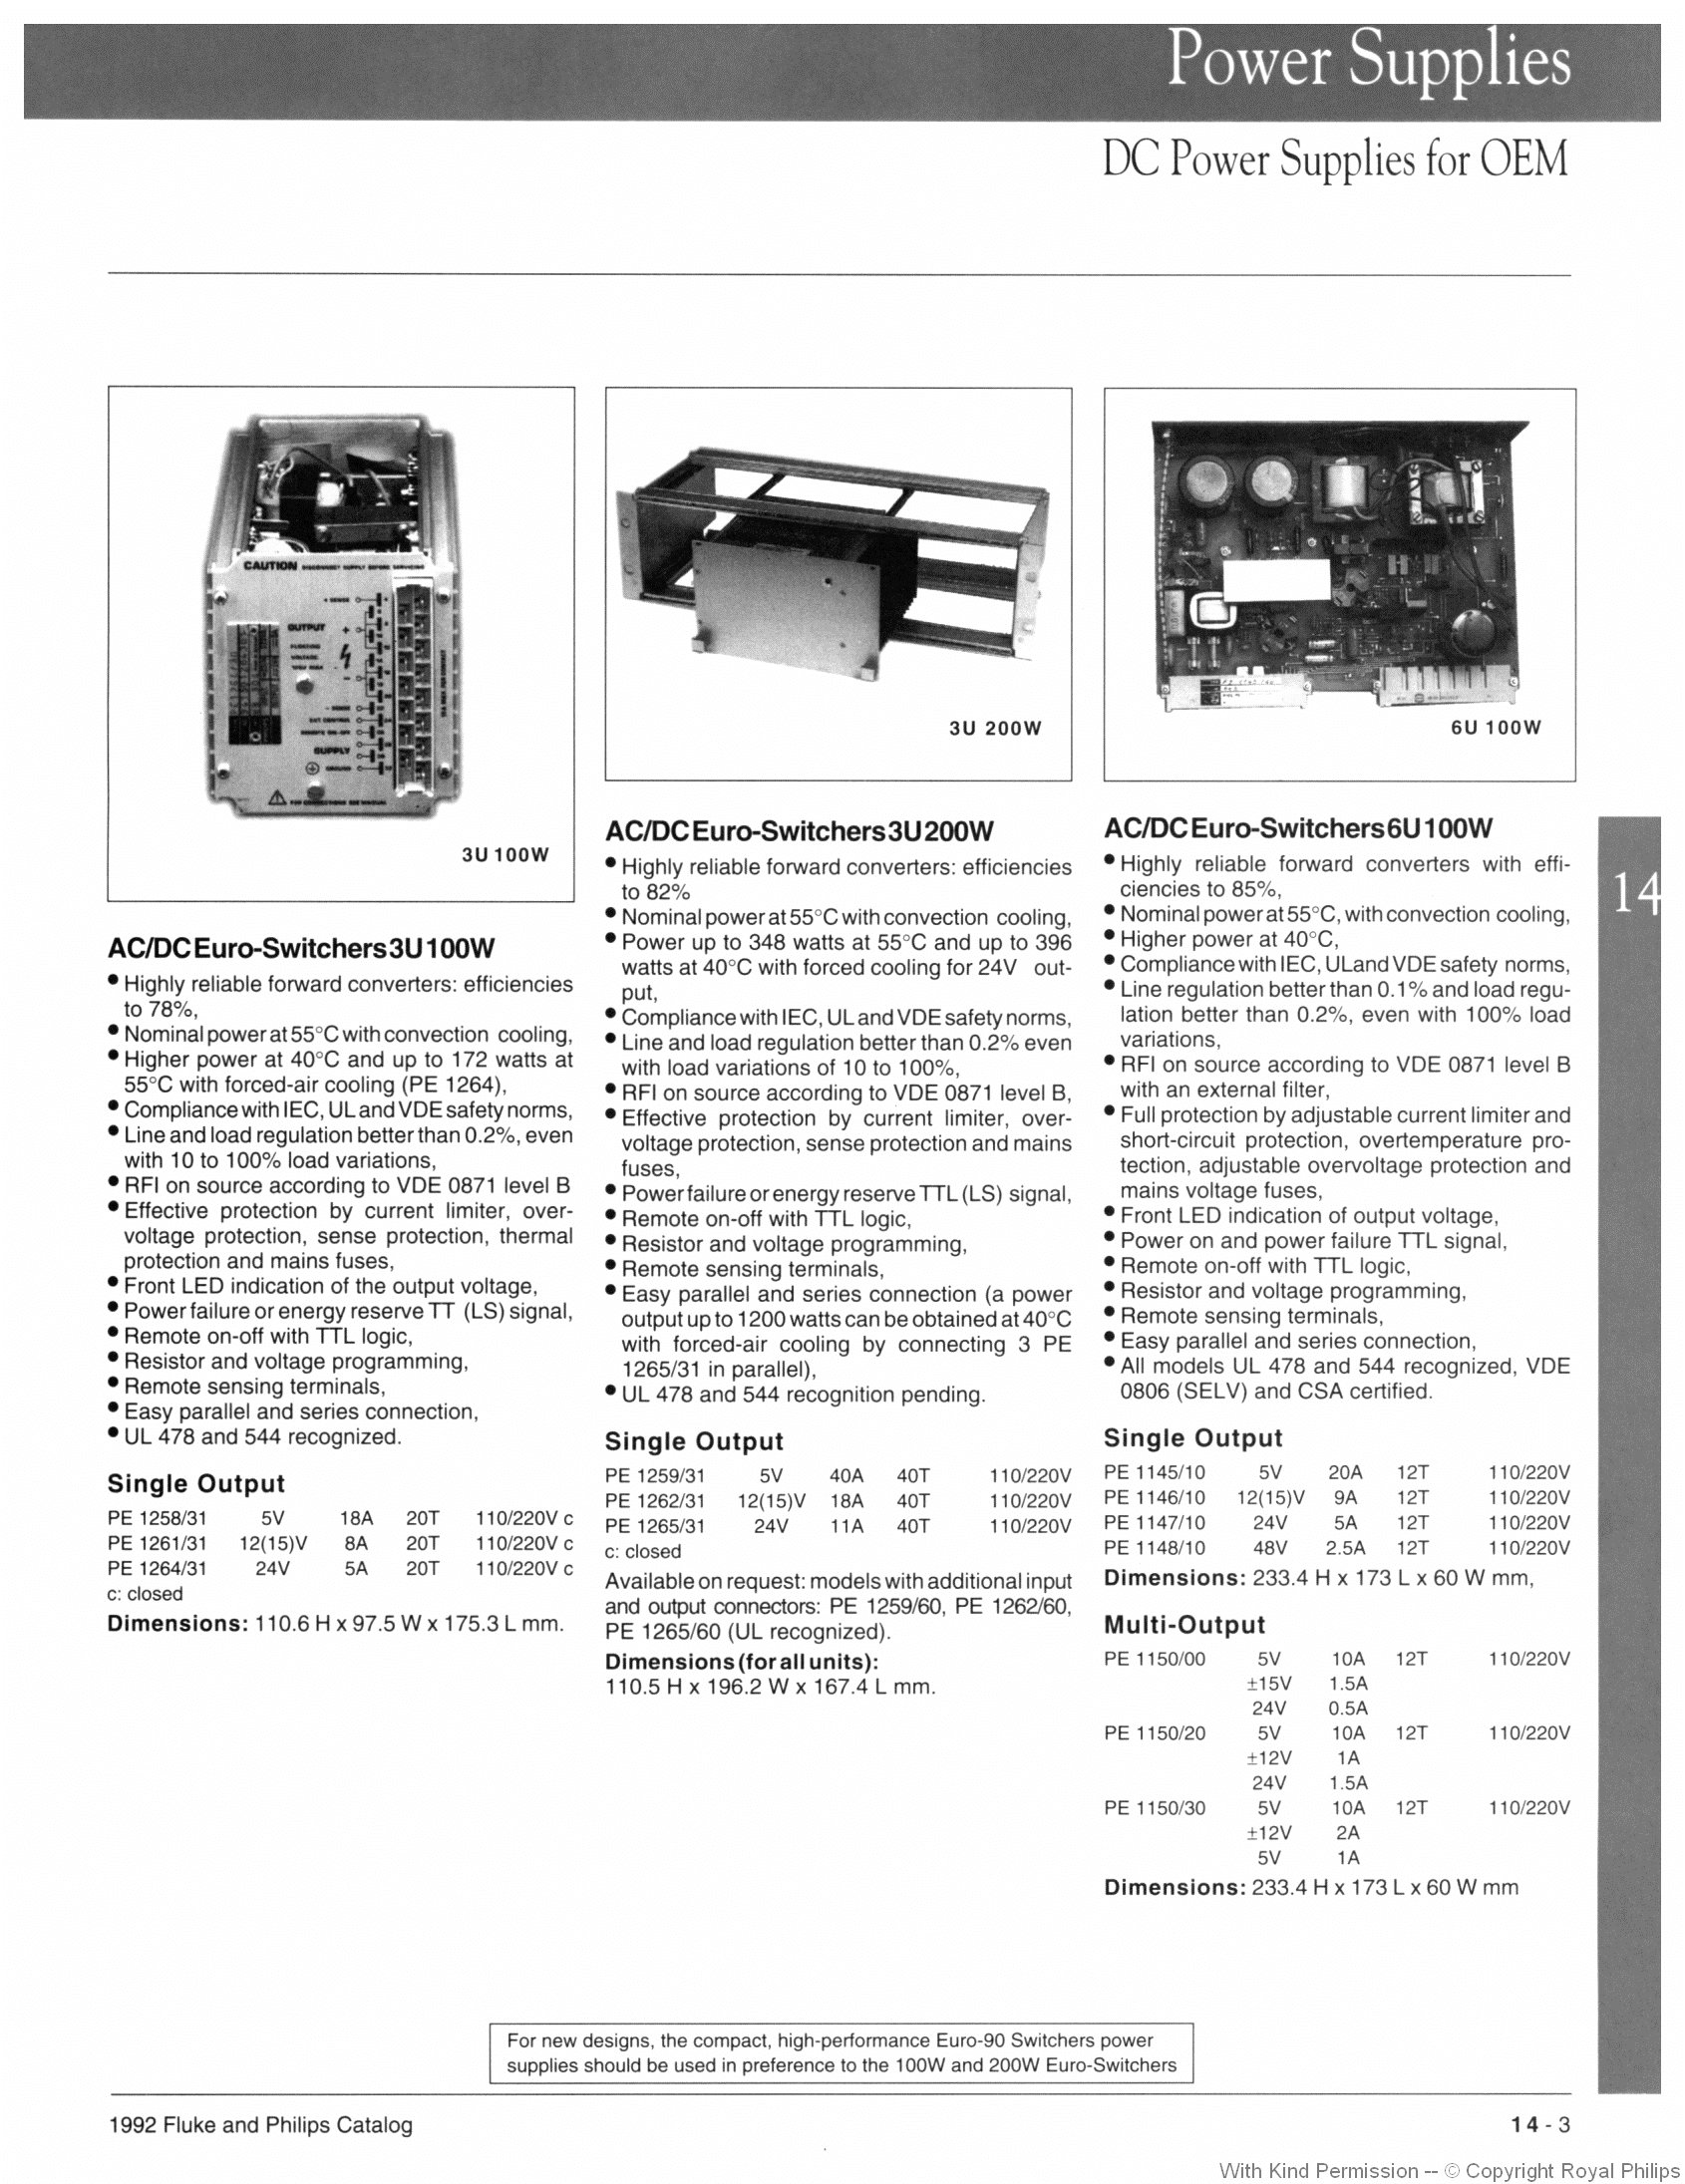 DC Power Supplies for OEM